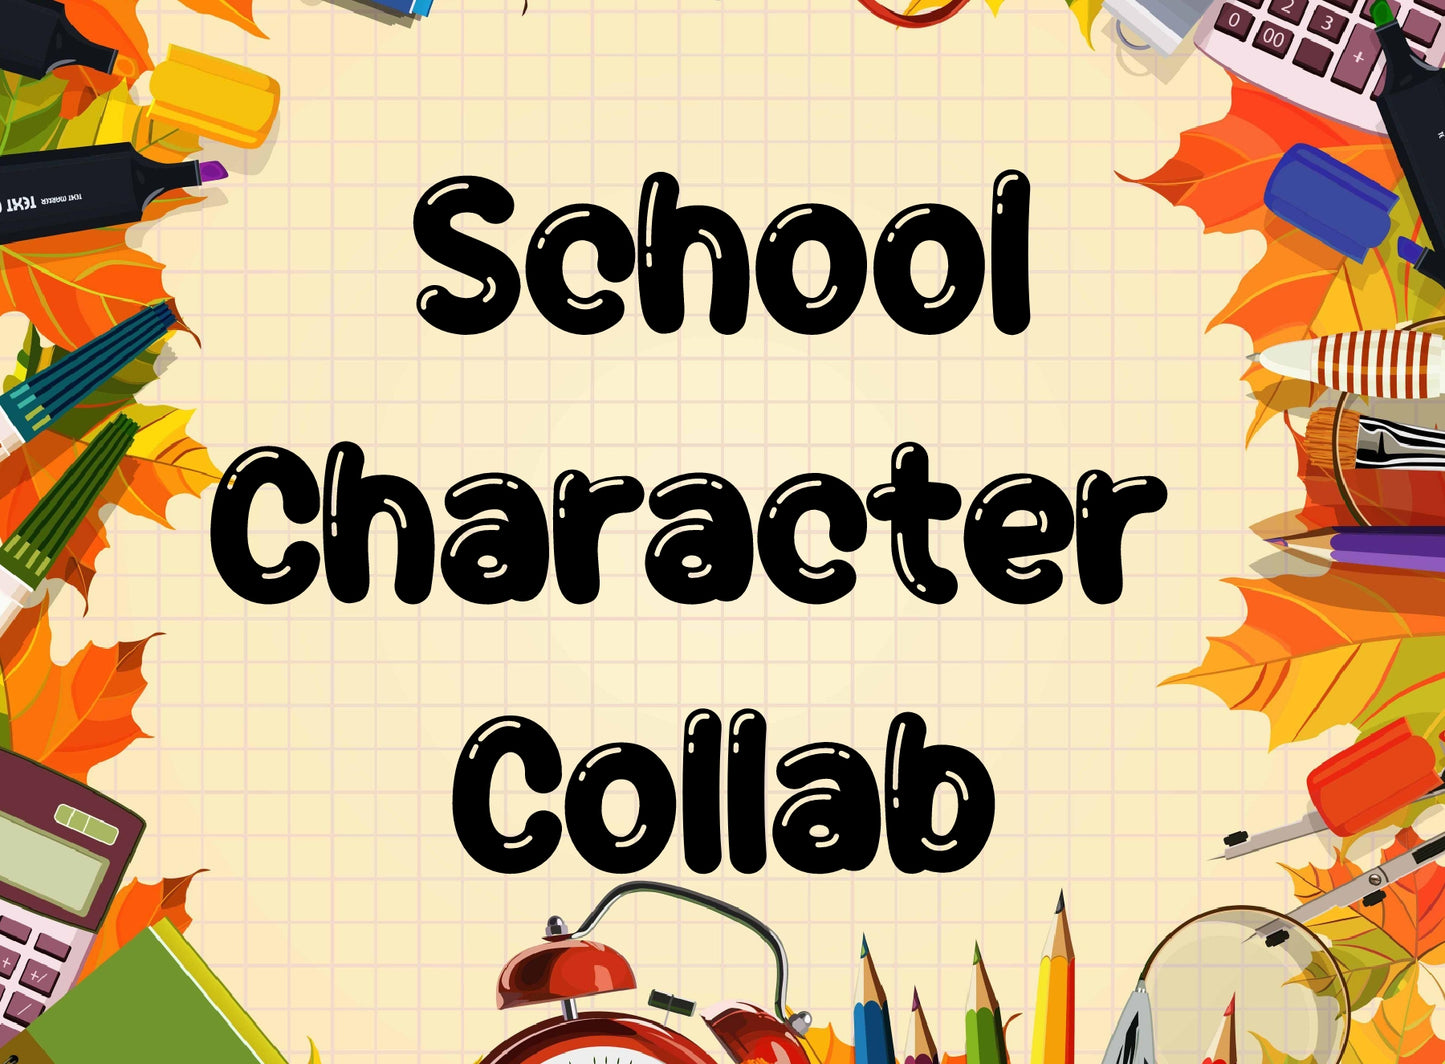 School Character Collab